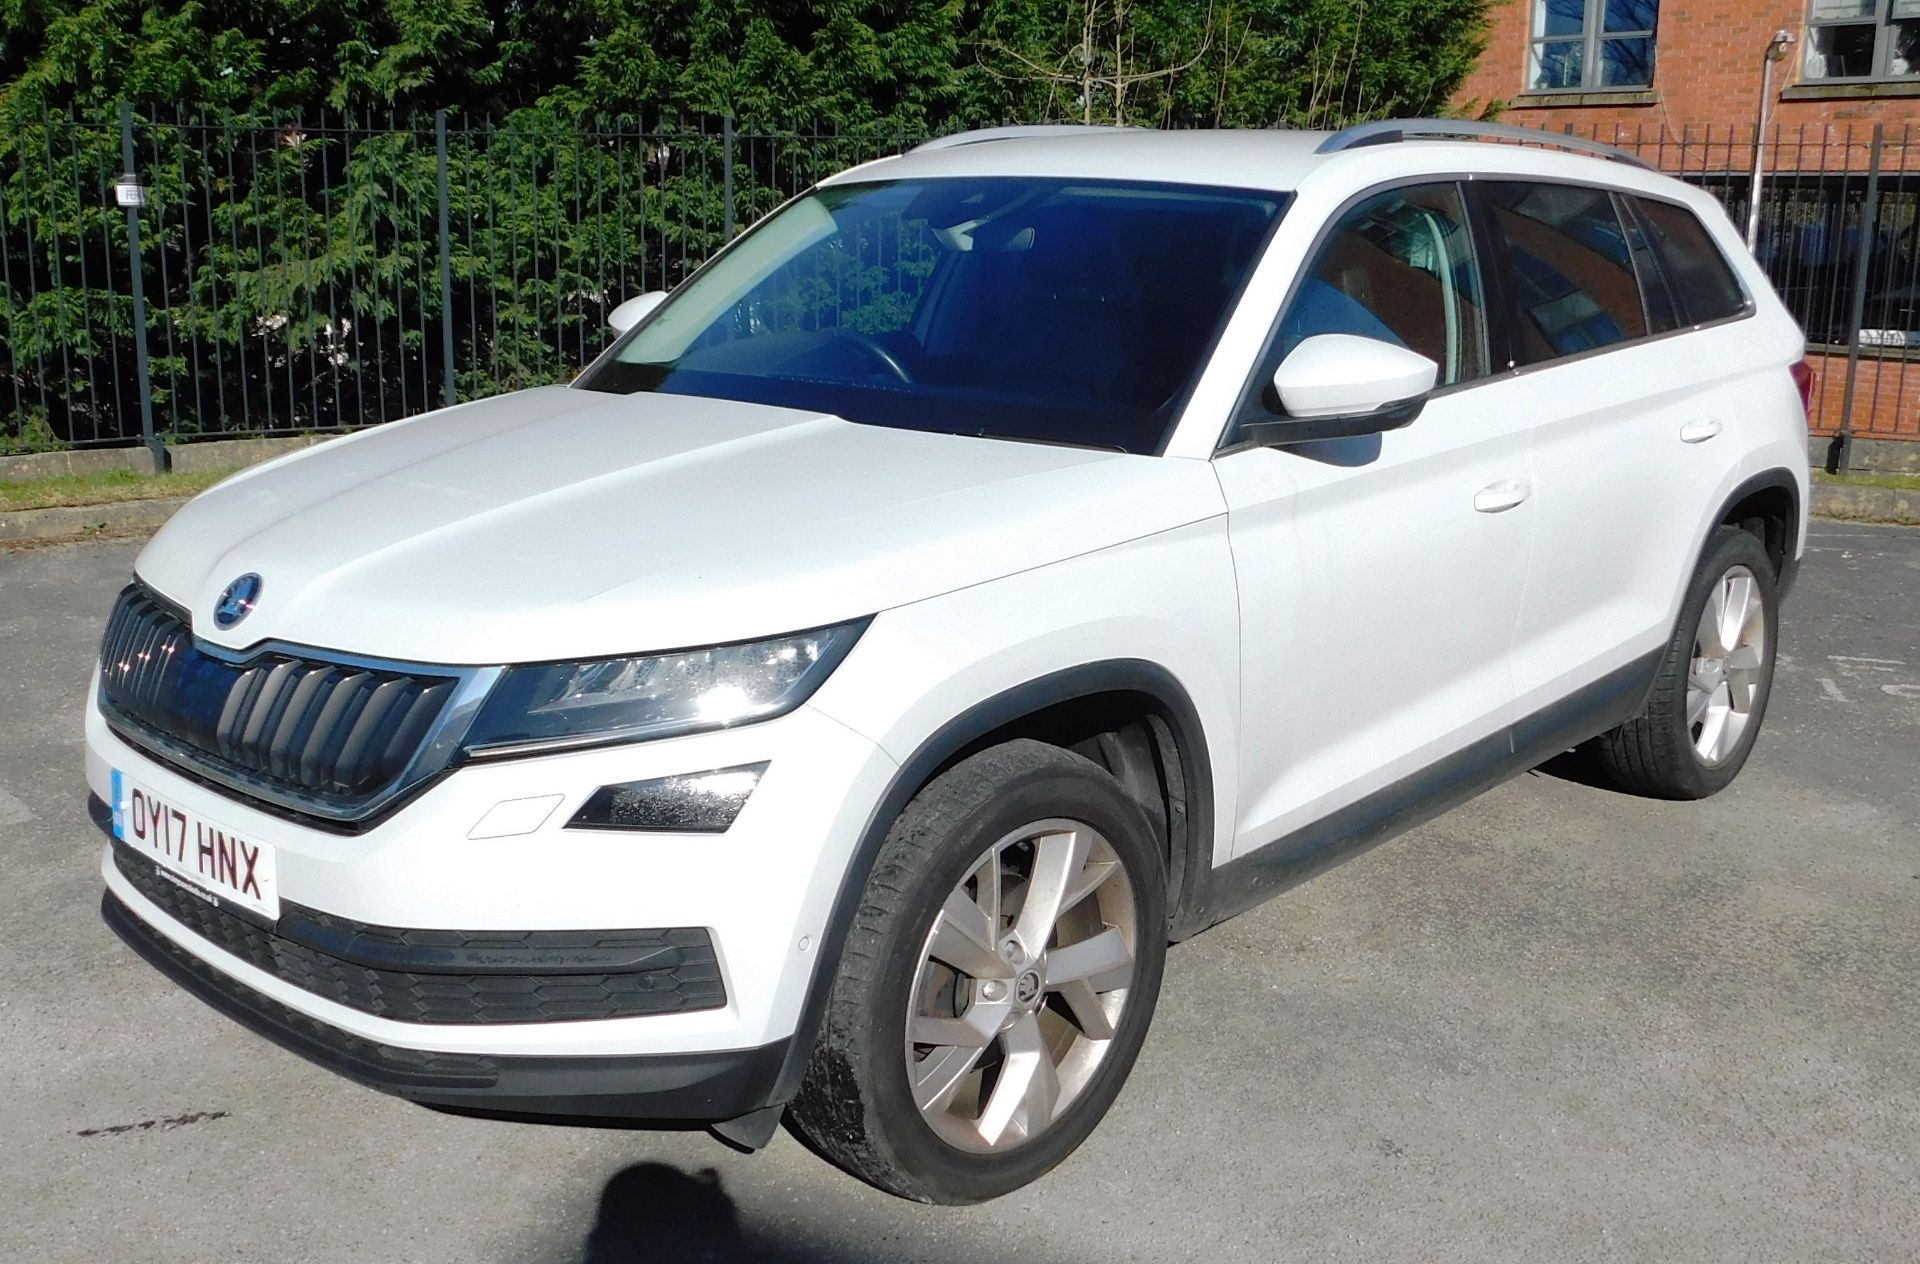 Skoda Kodiaq 2.0 TDI SCR-S 150PS 7 Seat Auto with leather seats, parking assist camera, satellite - Image 3 of 11